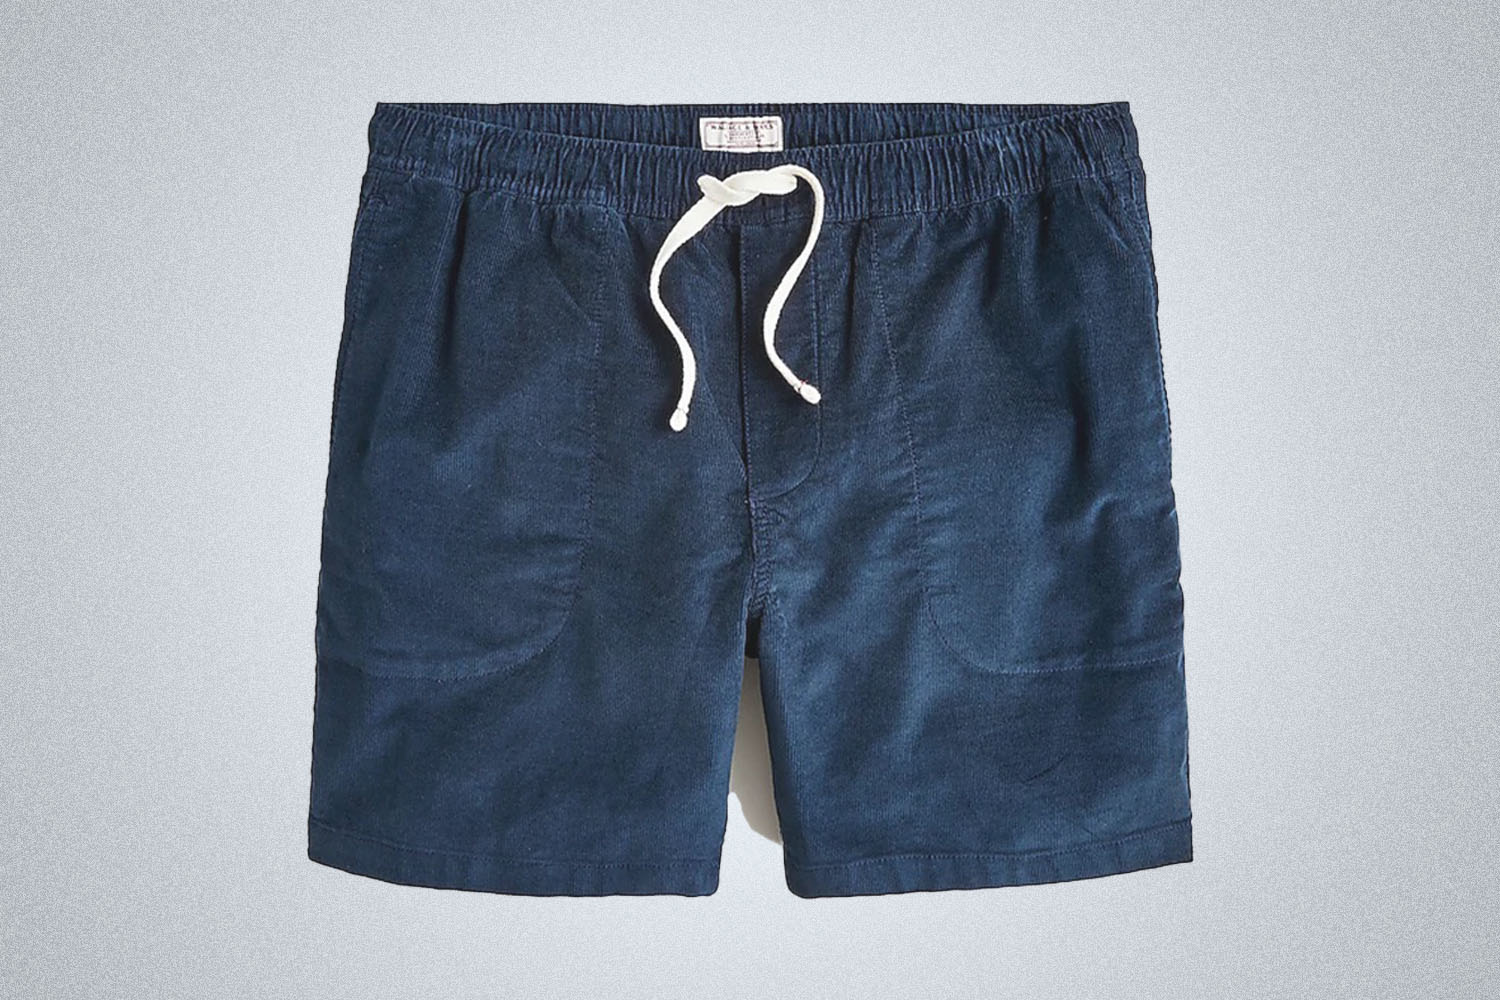 a pair of Wallace and Barnes blue corduroy shorts on a grey background